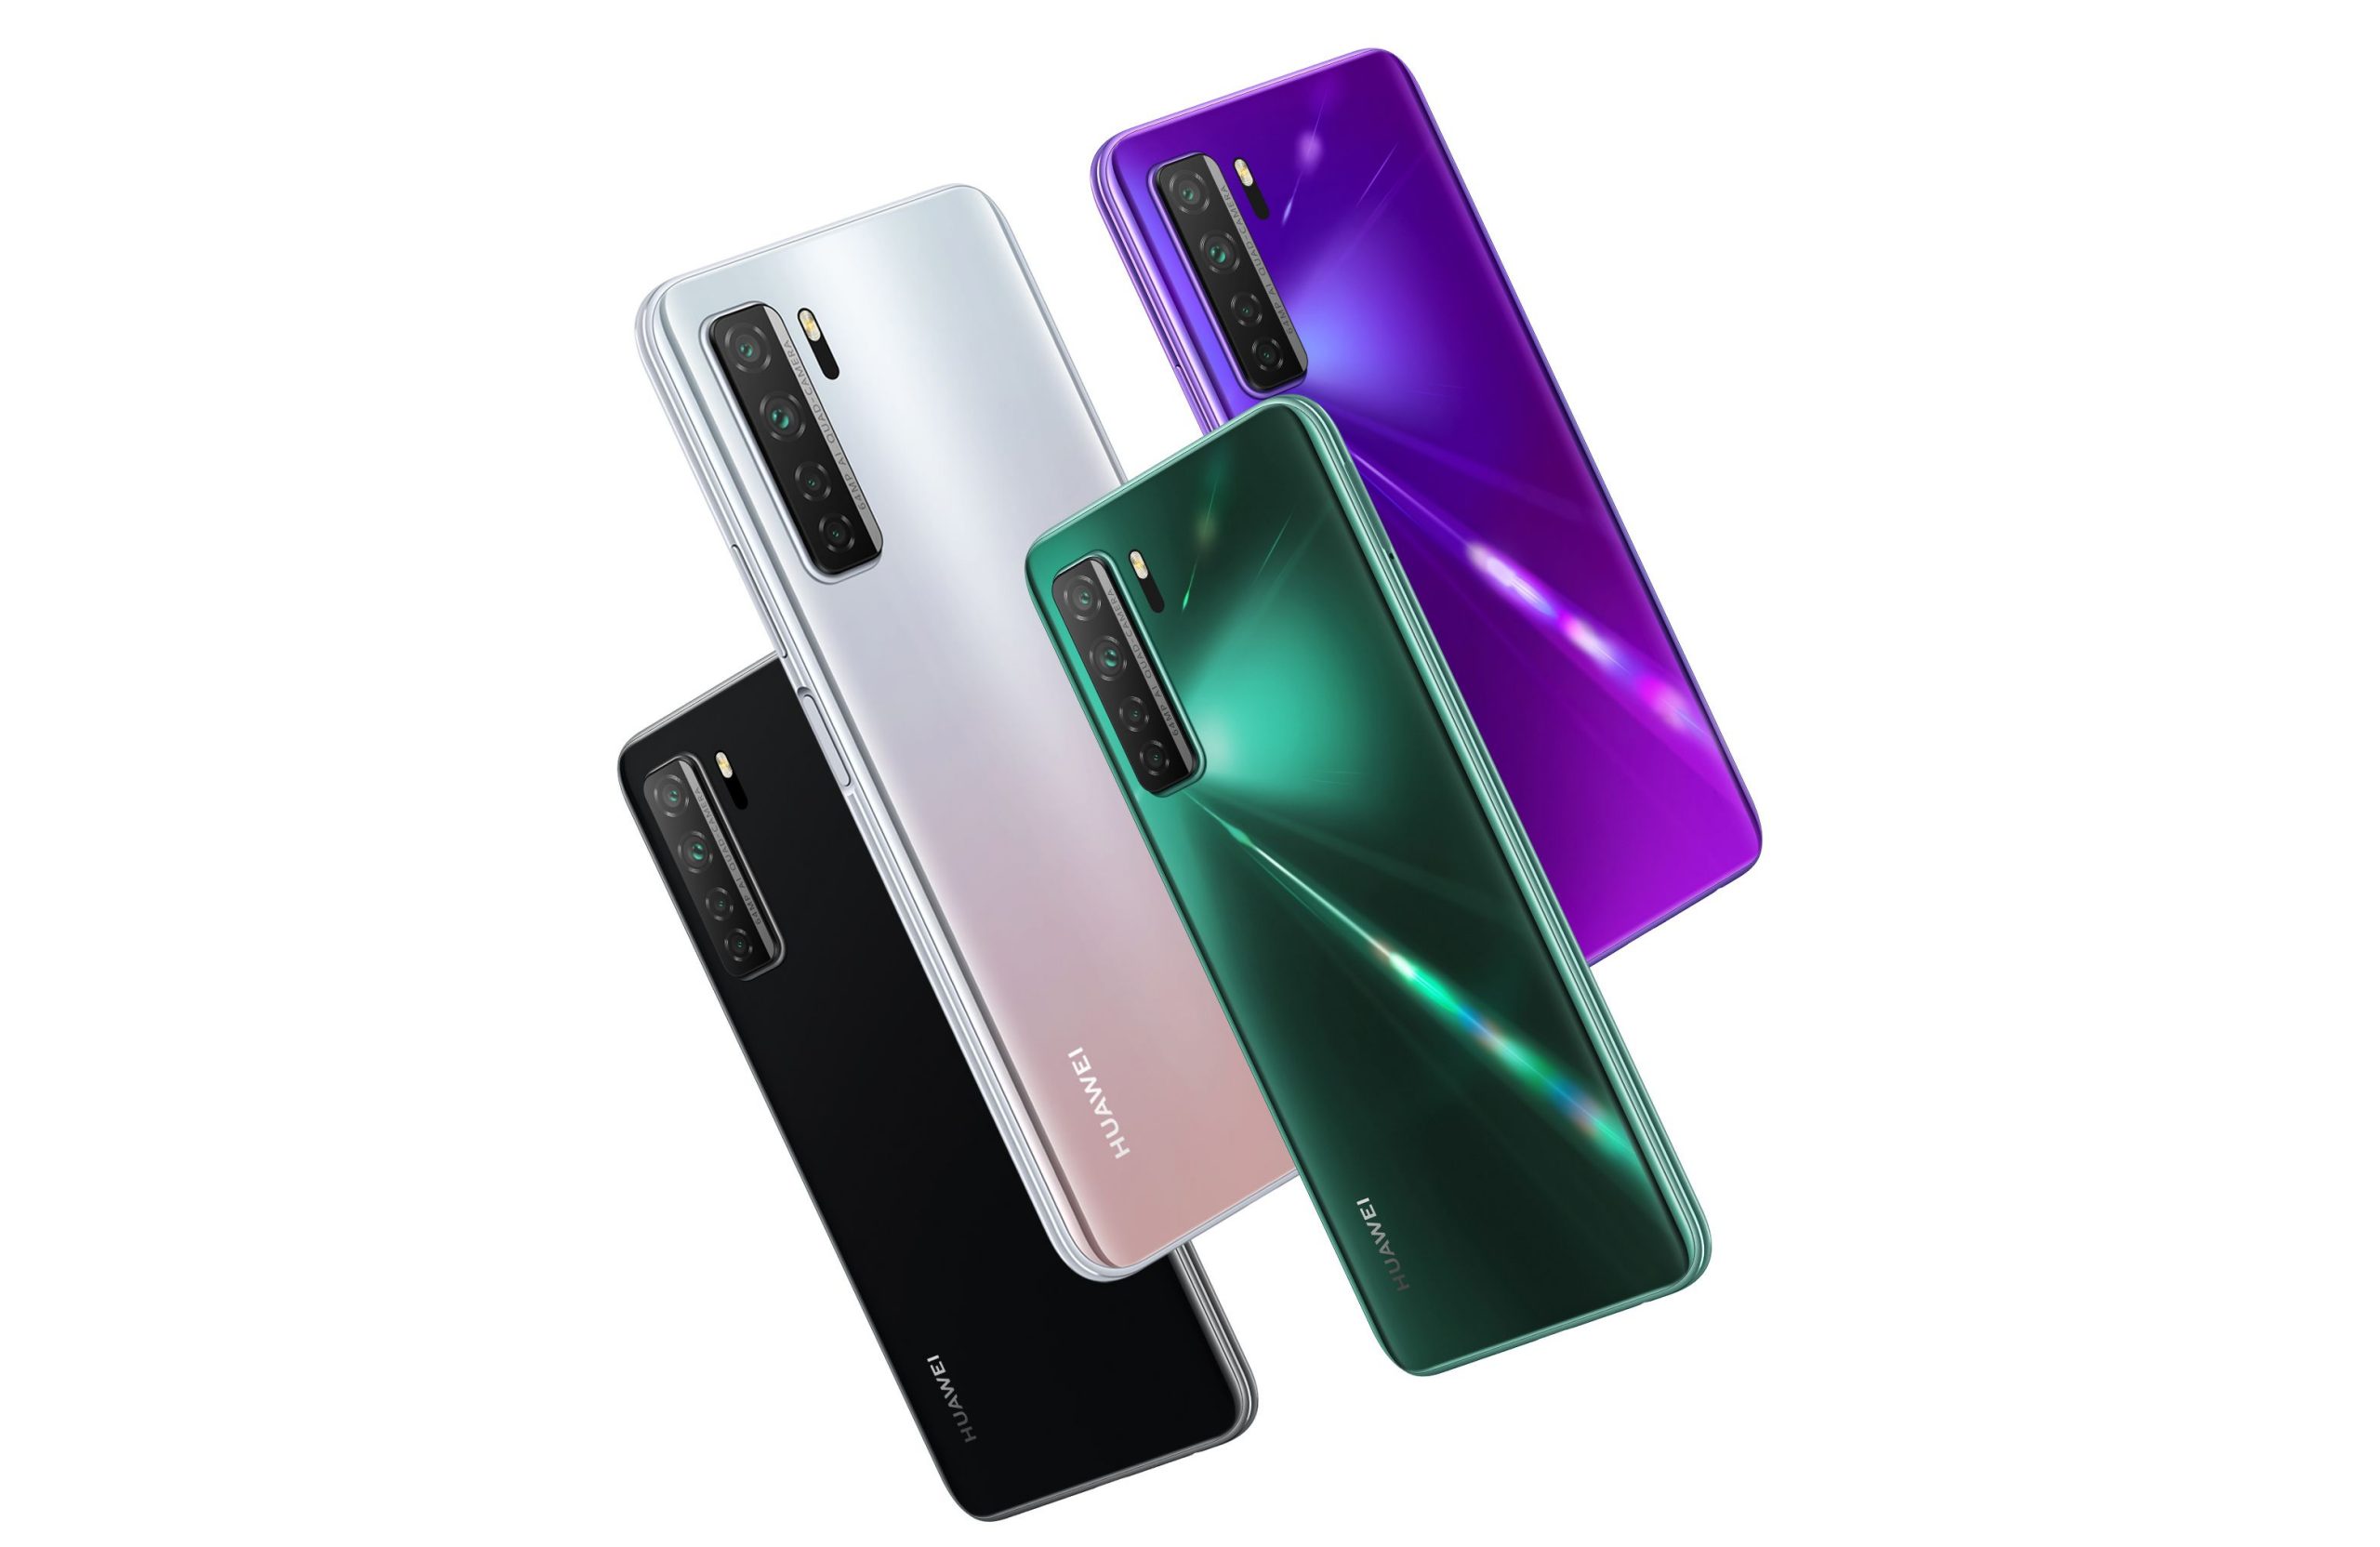 Huawei Nova 7 SE 5G Vitality Edition with Dimensity 800U launched for 2,299 Yuan (~$342)